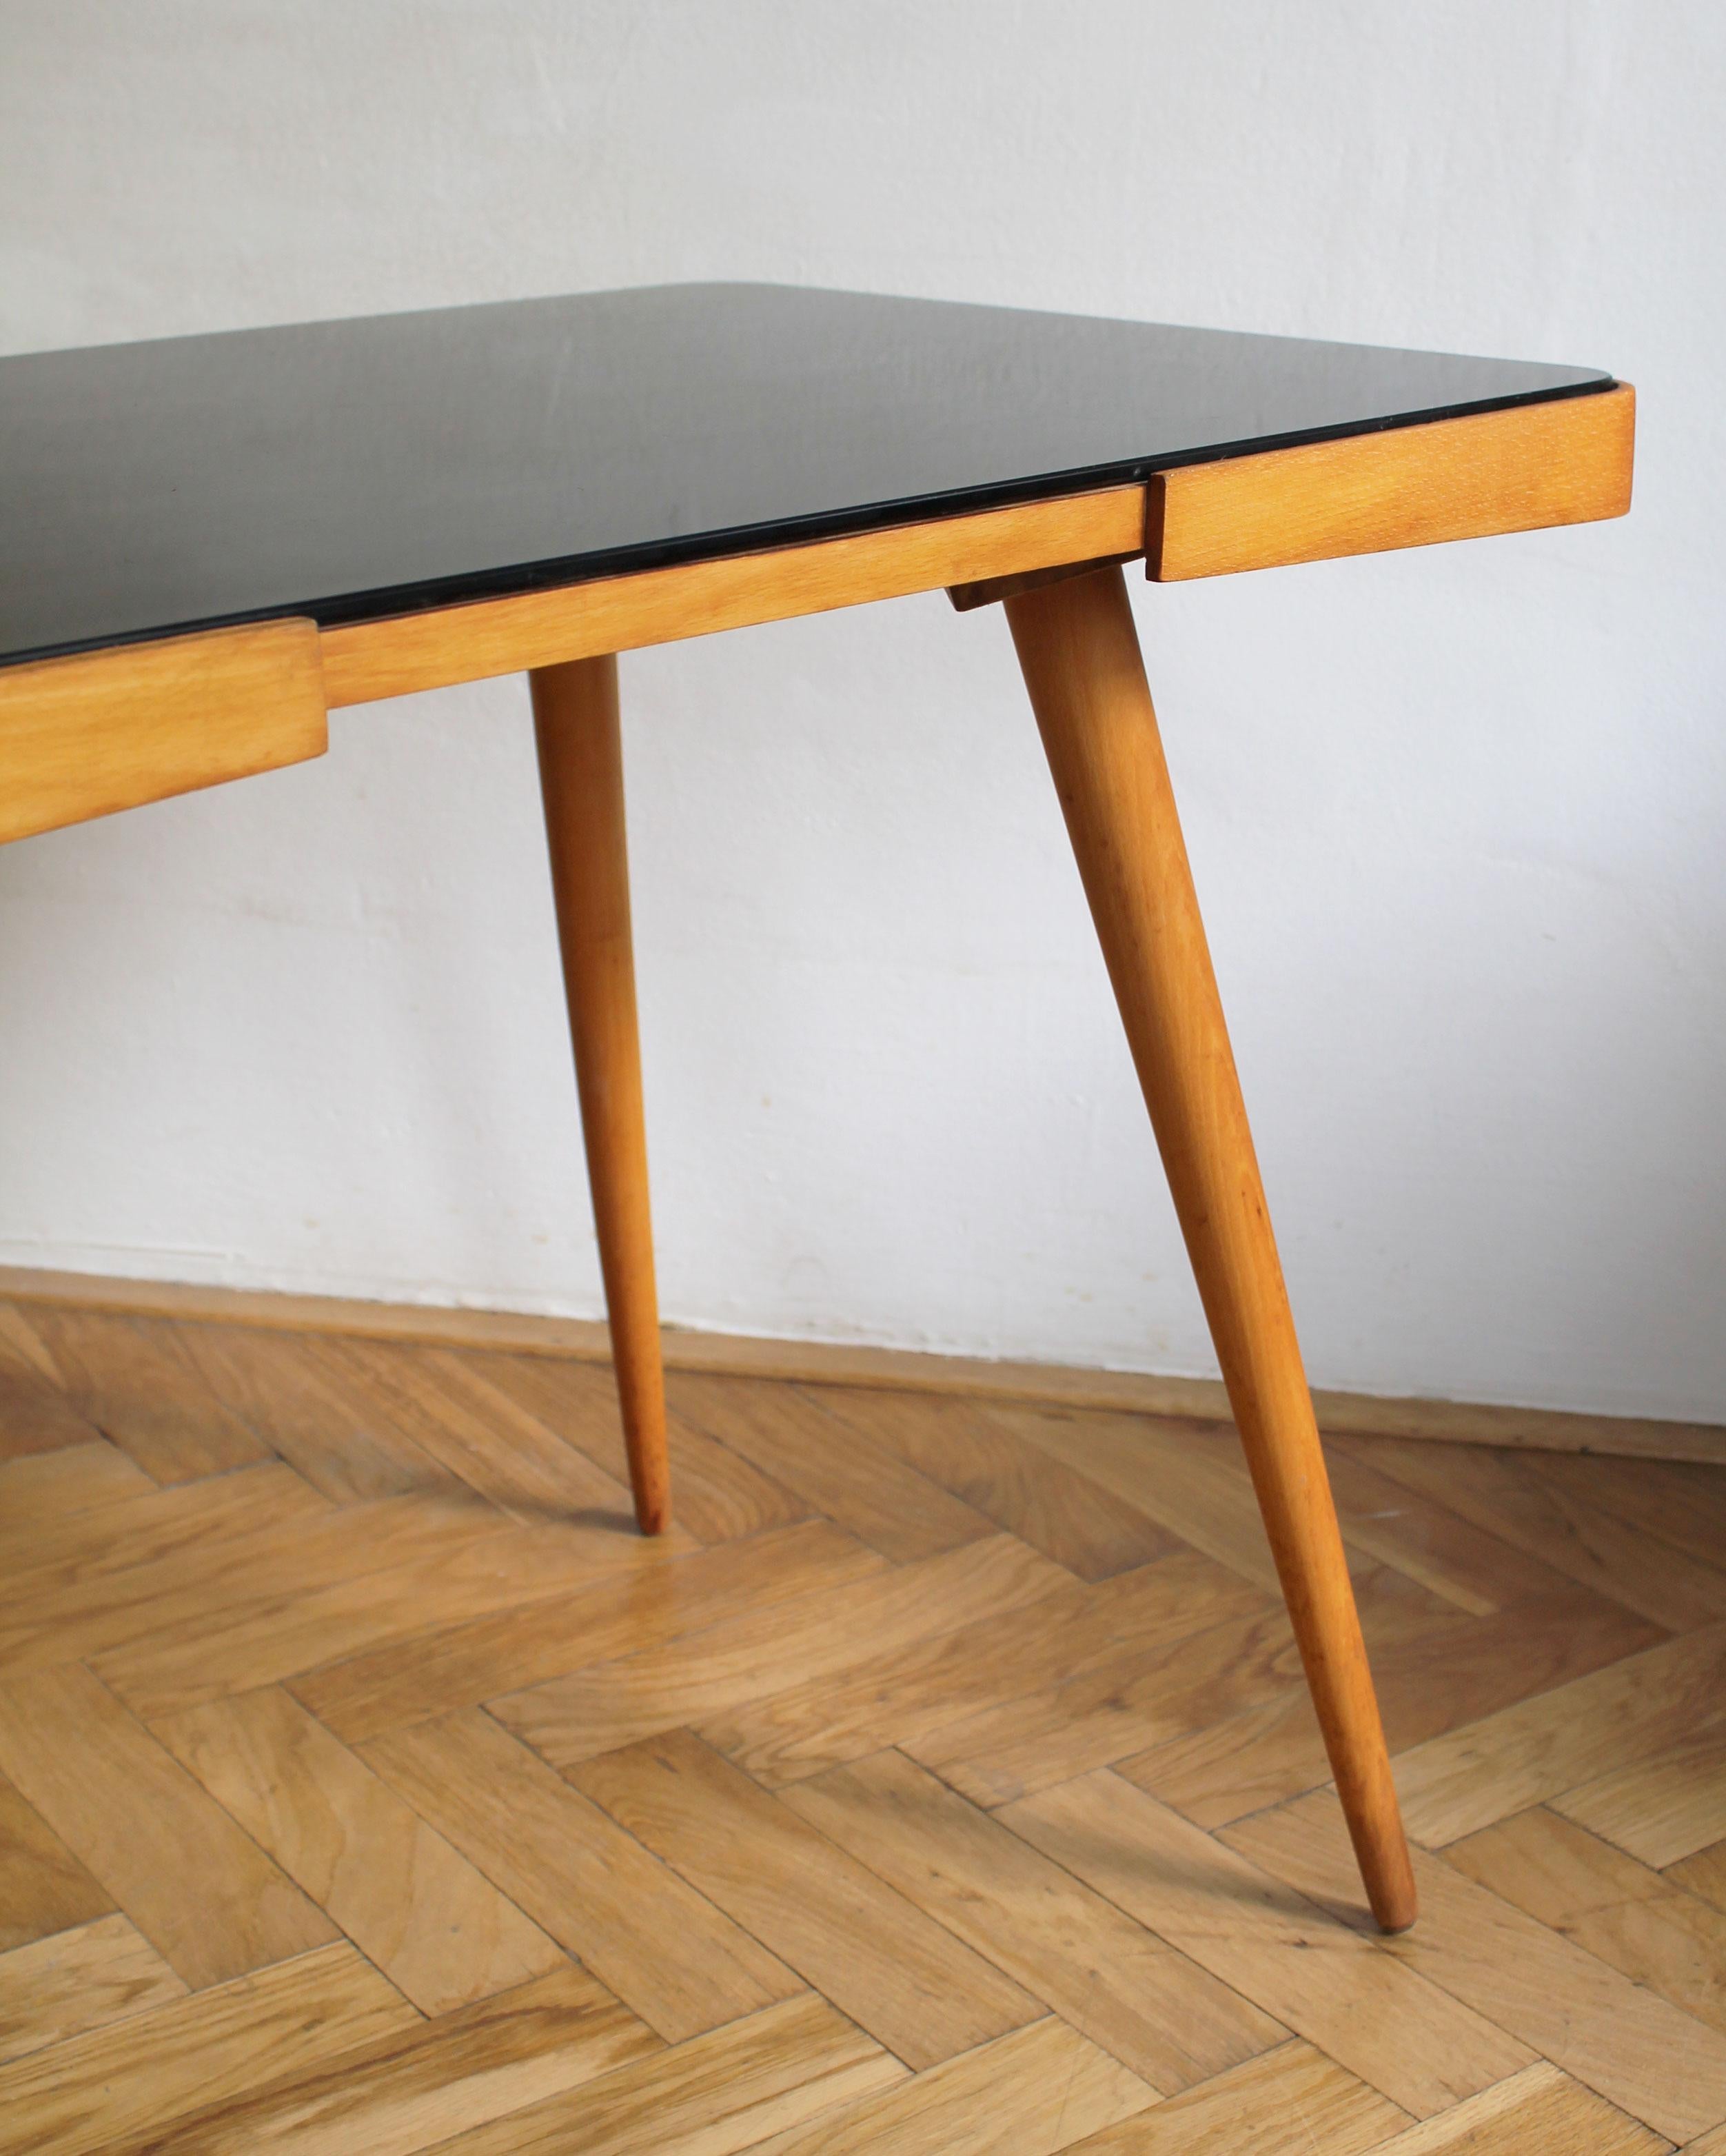 1960's Mid Century Coffee Table With a Black Opaxite Glass - Smaller version For Sale 1